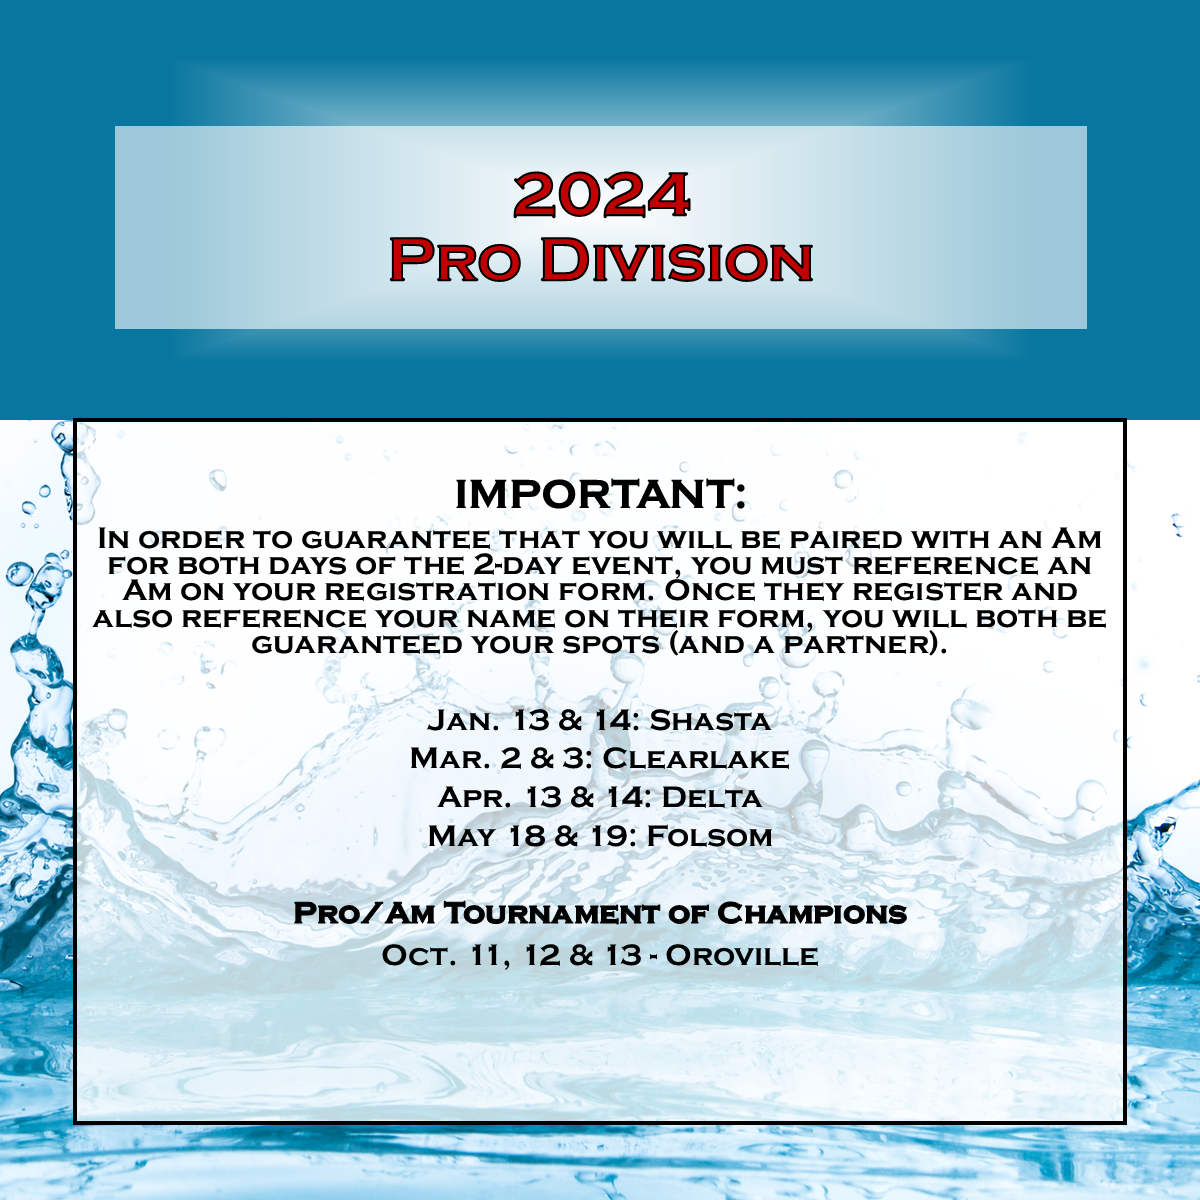 Pro Division Entry: Clearlake - March 2 & 3, 2024